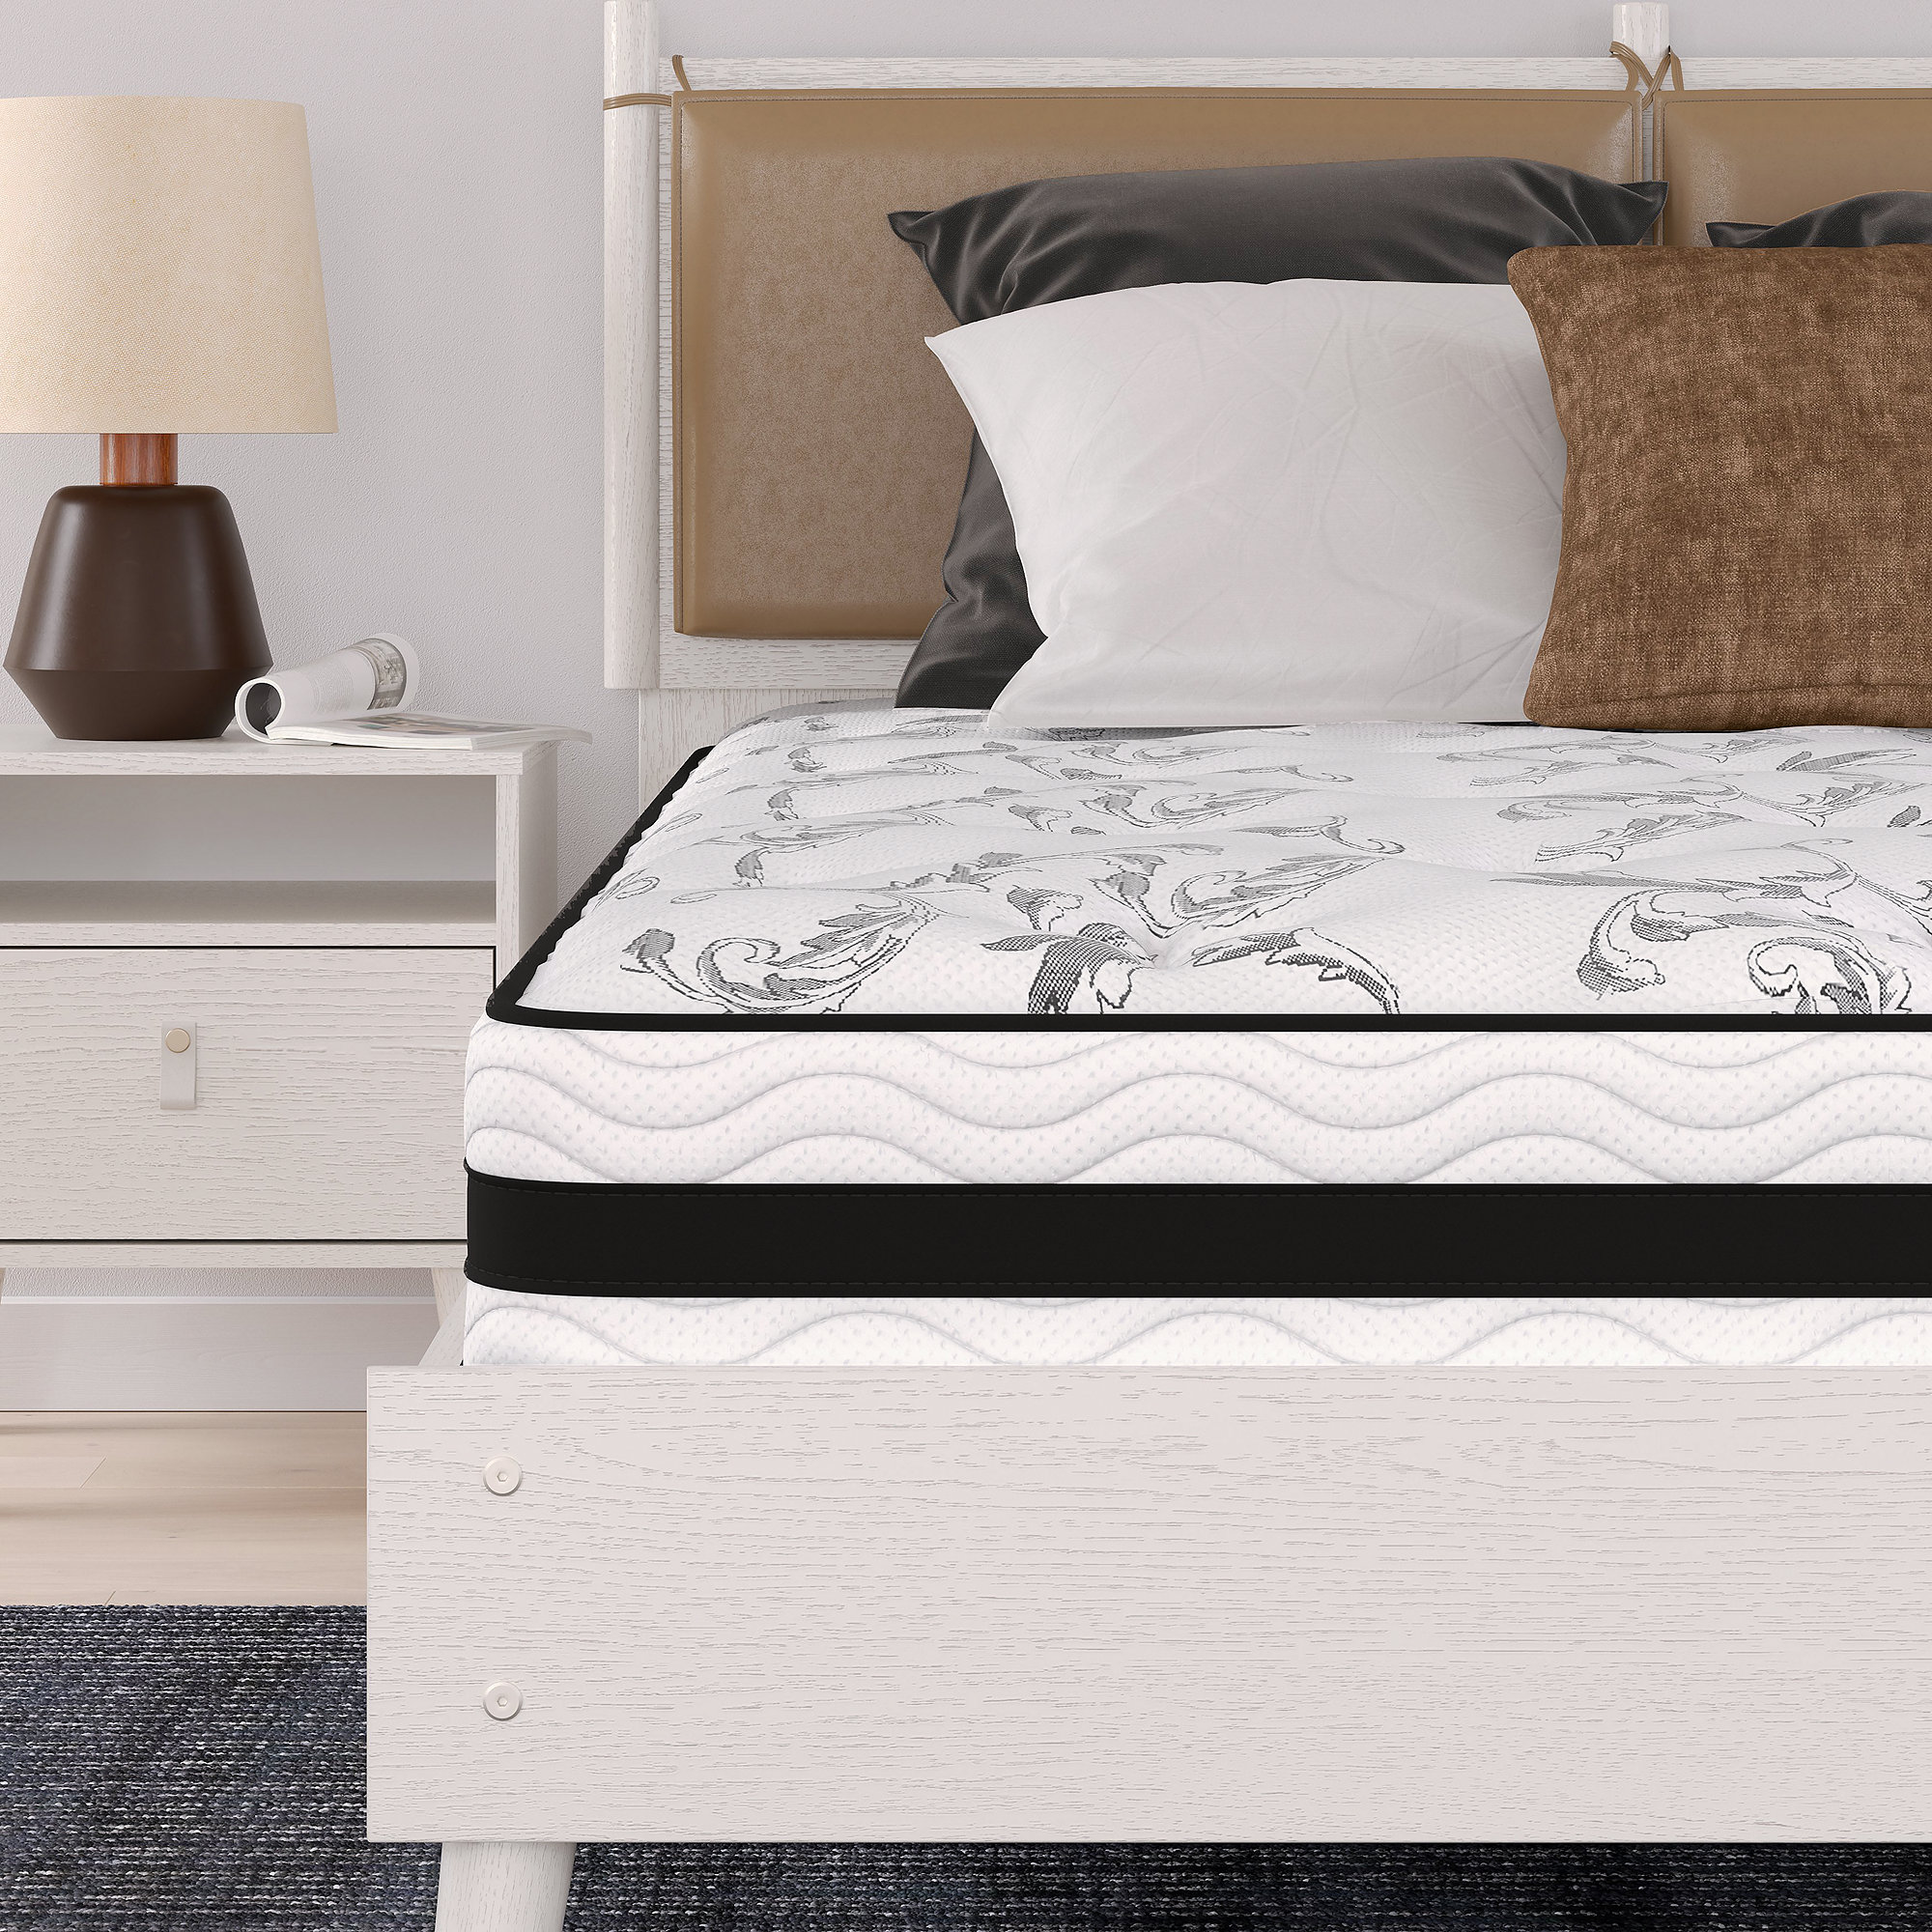 Signature Design by Ashley  Chime 10 Inch Hybrid Twin Mattress in a Box, White - image 1 of 9